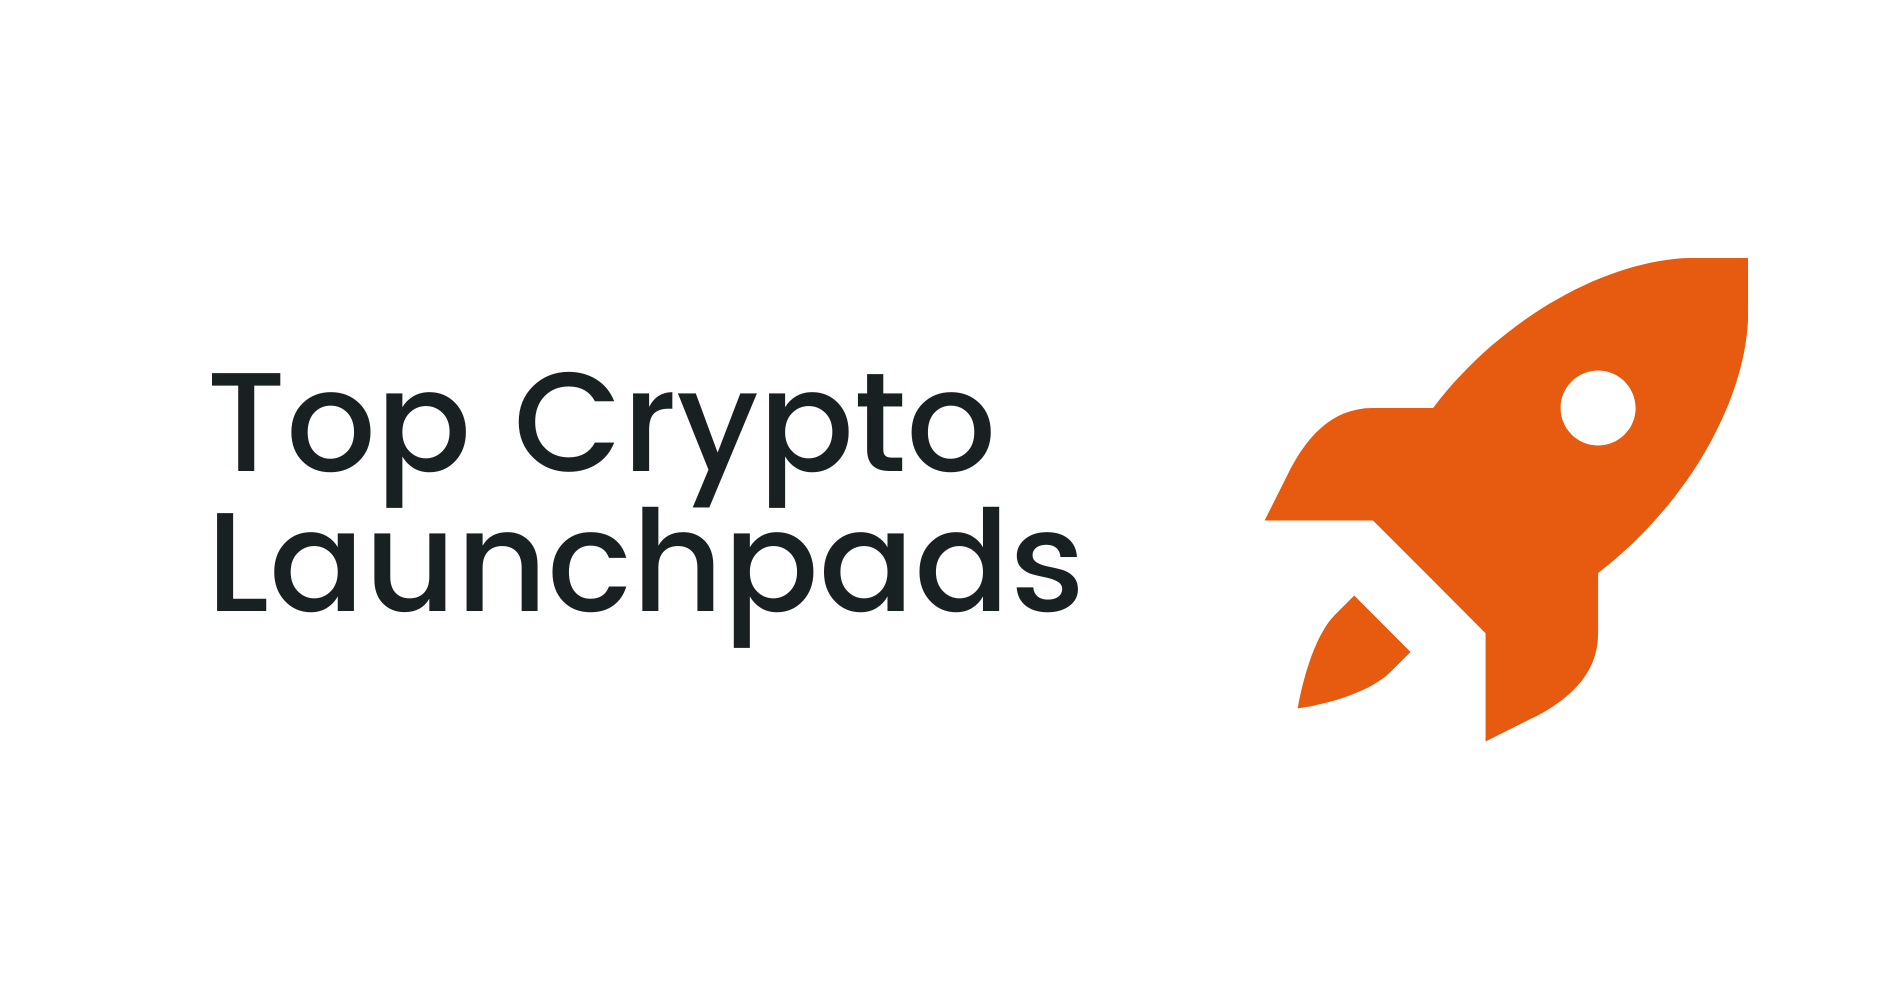 Top Crypto Launchpads